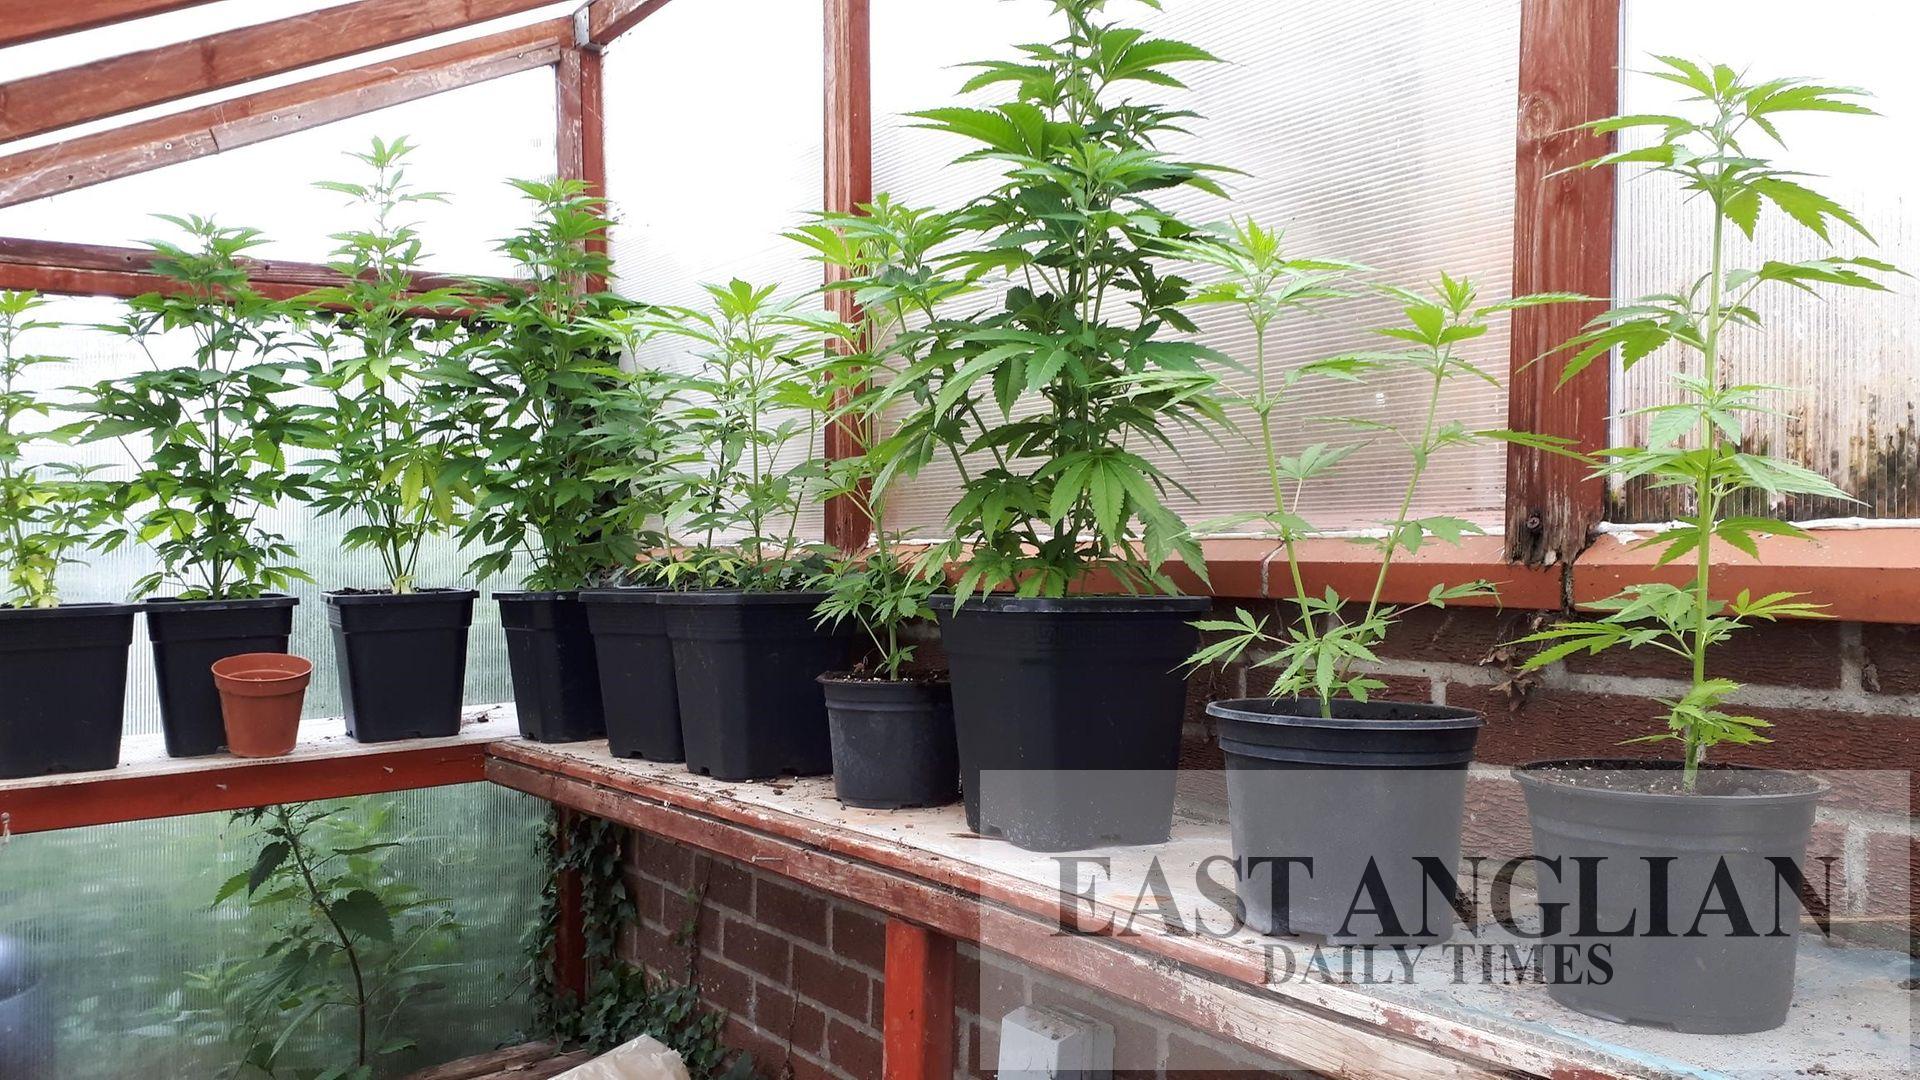 Two men arrested after police uncover cannabis farm